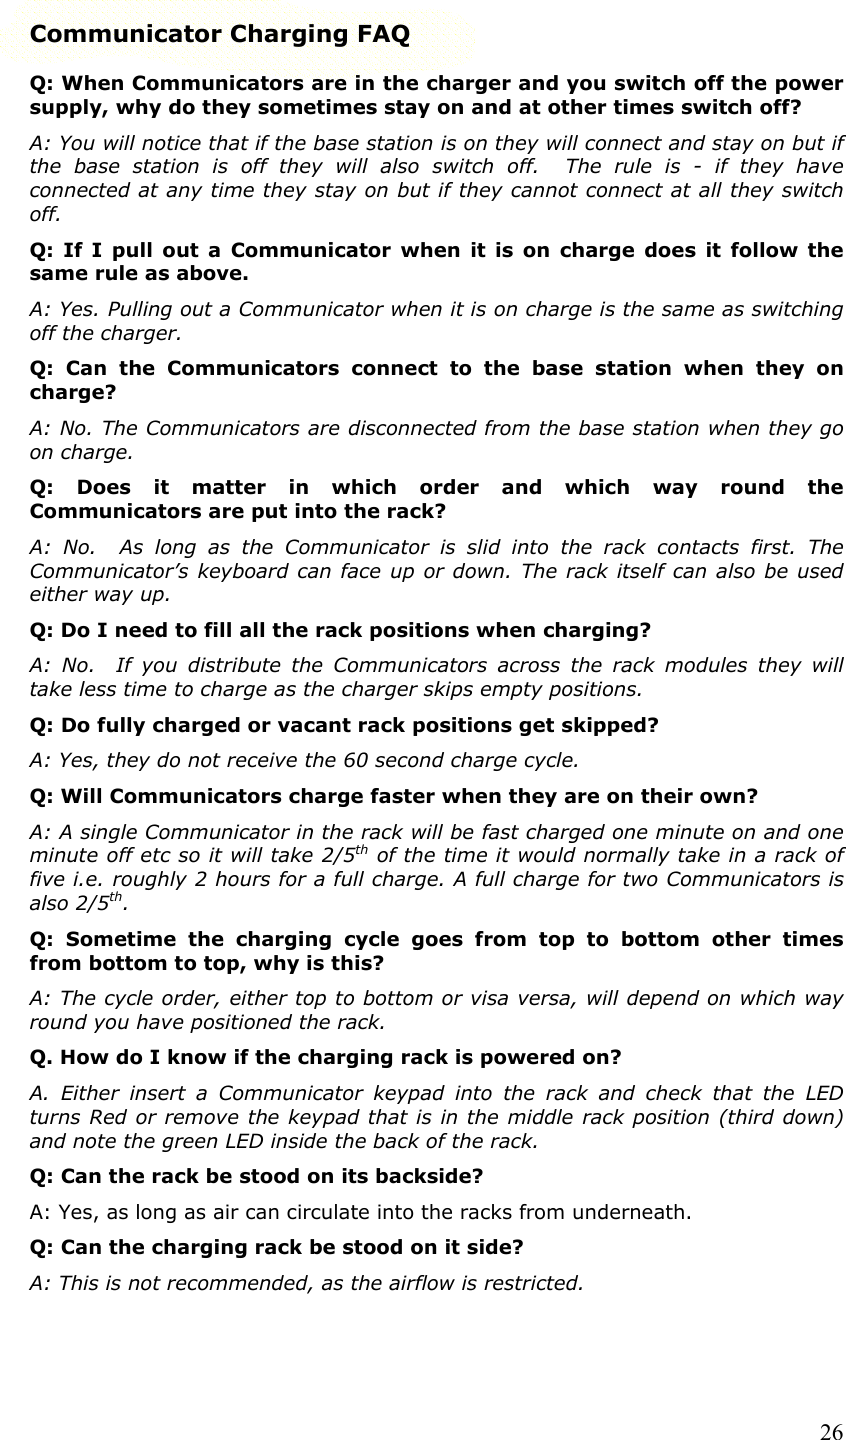  26Communicator Charging FAQ Q: When Communicators are in the charger and you switch off the power supply, why do they sometimes stay on and at other times switch off? A: You will notice that if the base station is on they will connect and stay on but if the base station is off they will also switch off.  The rule is - if they have connected at any time they stay on but if they cannot connect at all they switch off. Q: If I pull out a Communicator when it is on charge does it follow the same rule as above. A: Yes. Pulling out a Communicator when it is on charge is the same as switching off the charger. Q: Can the Communicators connect to the base station when they on charge? A: No. The Communicators are disconnected from the base station when they go on charge. Q: Does it matter in which order and which way round the Communicators are put into the rack? A: No.  As long as the Communicator is slid into the rack contacts first. The Communicator’s keyboard can face up or down. The rack itself can also be used either way up. Q: Do I need to fill all the rack positions when charging? A: No.  If you distribute the Communicators across the rack modules they will take less time to charge as the charger skips empty positions. Q: Do fully charged or vacant rack positions get skipped? A: Yes, they do not receive the 60 second charge cycle. Q: Will Communicators charge faster when they are on their own? A: A single Communicator in the rack will be fast charged one minute on and one minute off etc so it will take 2/5th of the time it would normally take in a rack of five i.e. roughly 2 hours for a full charge. A full charge for two Communicators is also 2/5th. Q: Sometime the charging cycle goes from top to bottom other times from bottom to top, why is this? A: The cycle order, either top to bottom or visa versa, will depend on which way round you have positioned the rack. Q. How do I know if the charging rack is powered on? A. Either insert a Communicator keypad into the rack and check that the LED turns Red or remove the keypad that is in the middle rack position (third down) and note the green LED inside the back of the rack. Q: Can the rack be stood on its backside? A: Yes, as long as air can circulate into the racks from underneath. Q: Can the charging rack be stood on it side? A: This is not recommended, as the airflow is restricted. 